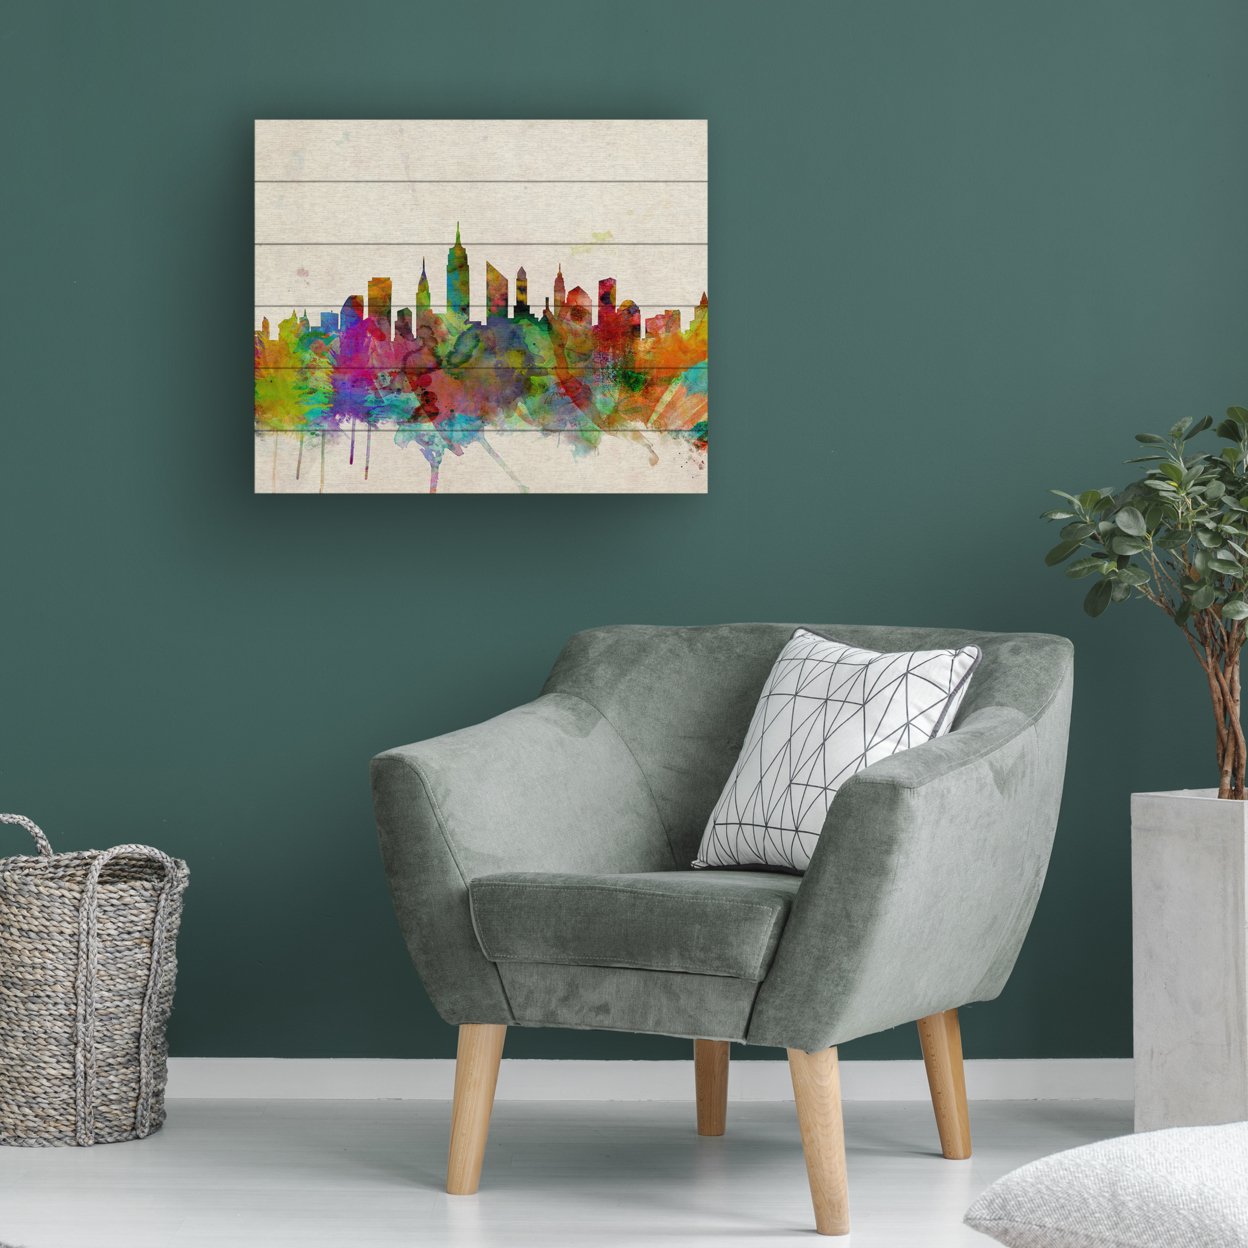 Wooden Slat Art 18 X 22 Inches Titled New York Skyline Tompsett Ready To Hang Home Decor Picture